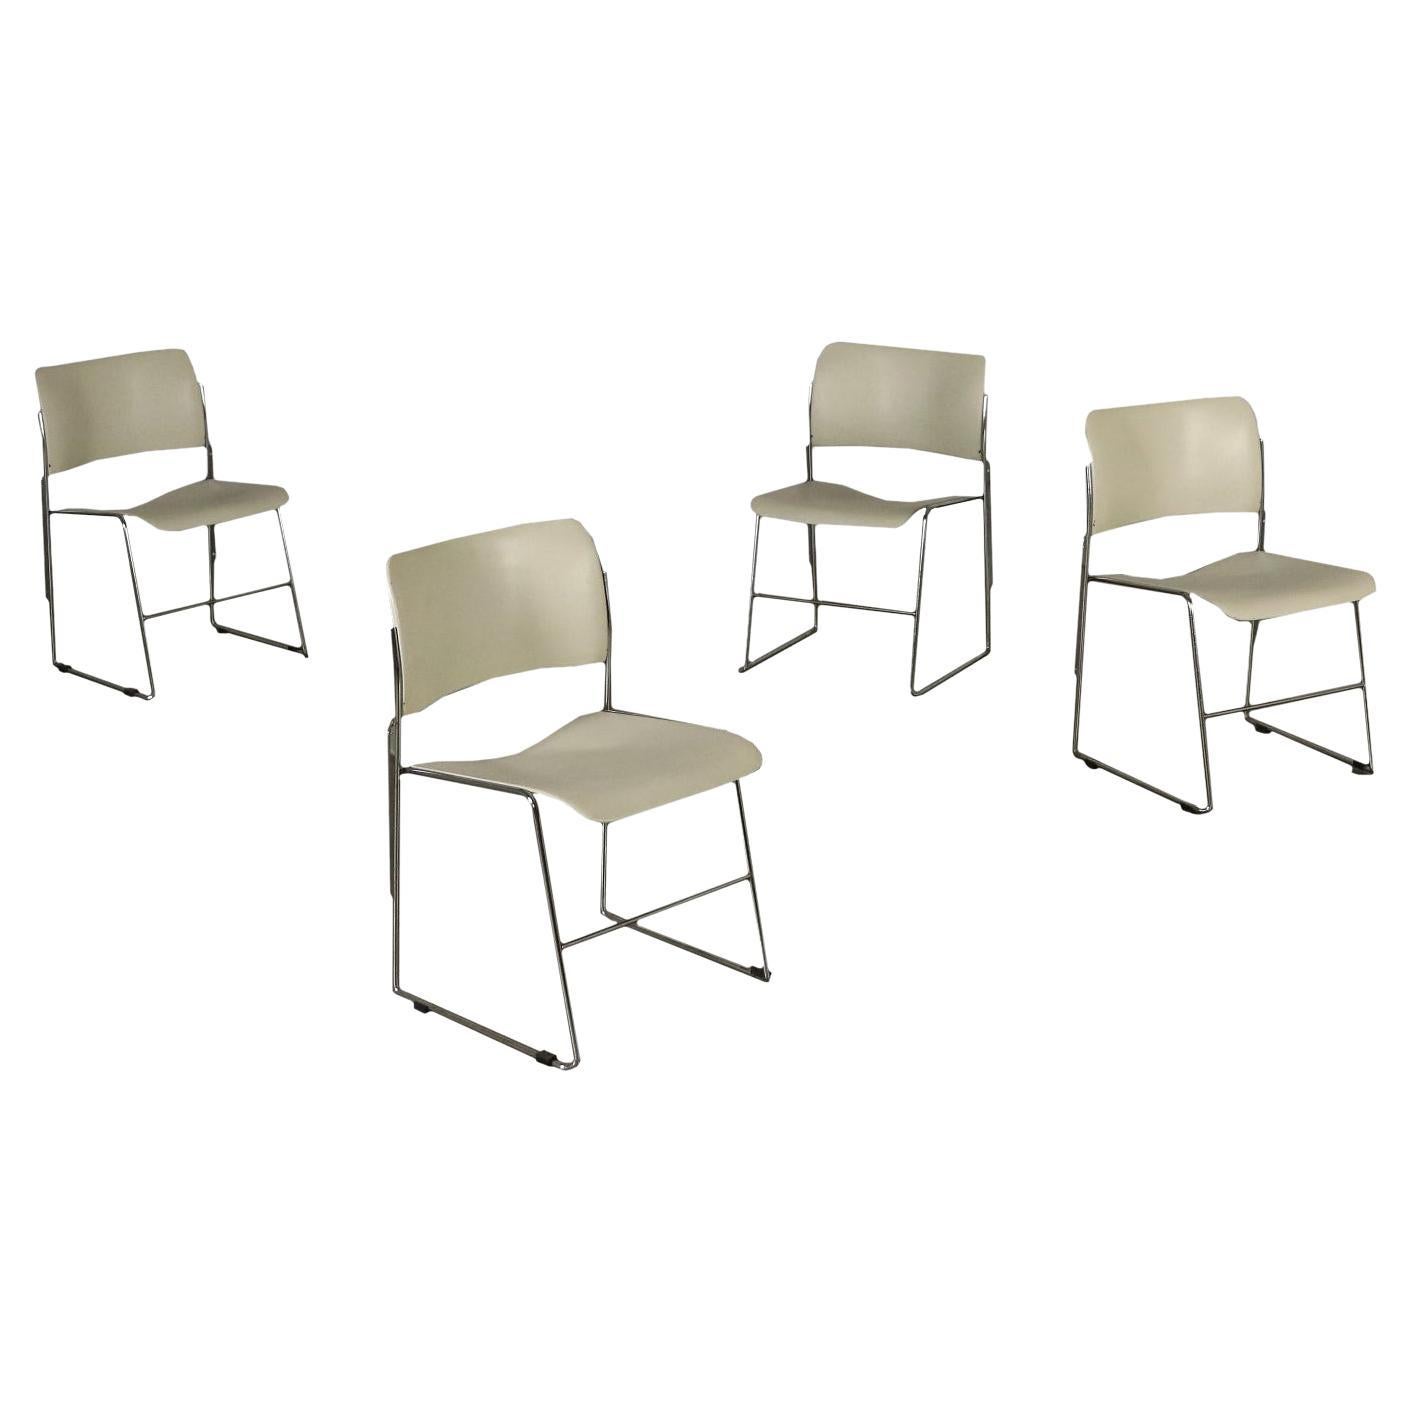 Four Chairs David Rowland for GF Forniture Steel Metal, Italy, 1960s-1970s